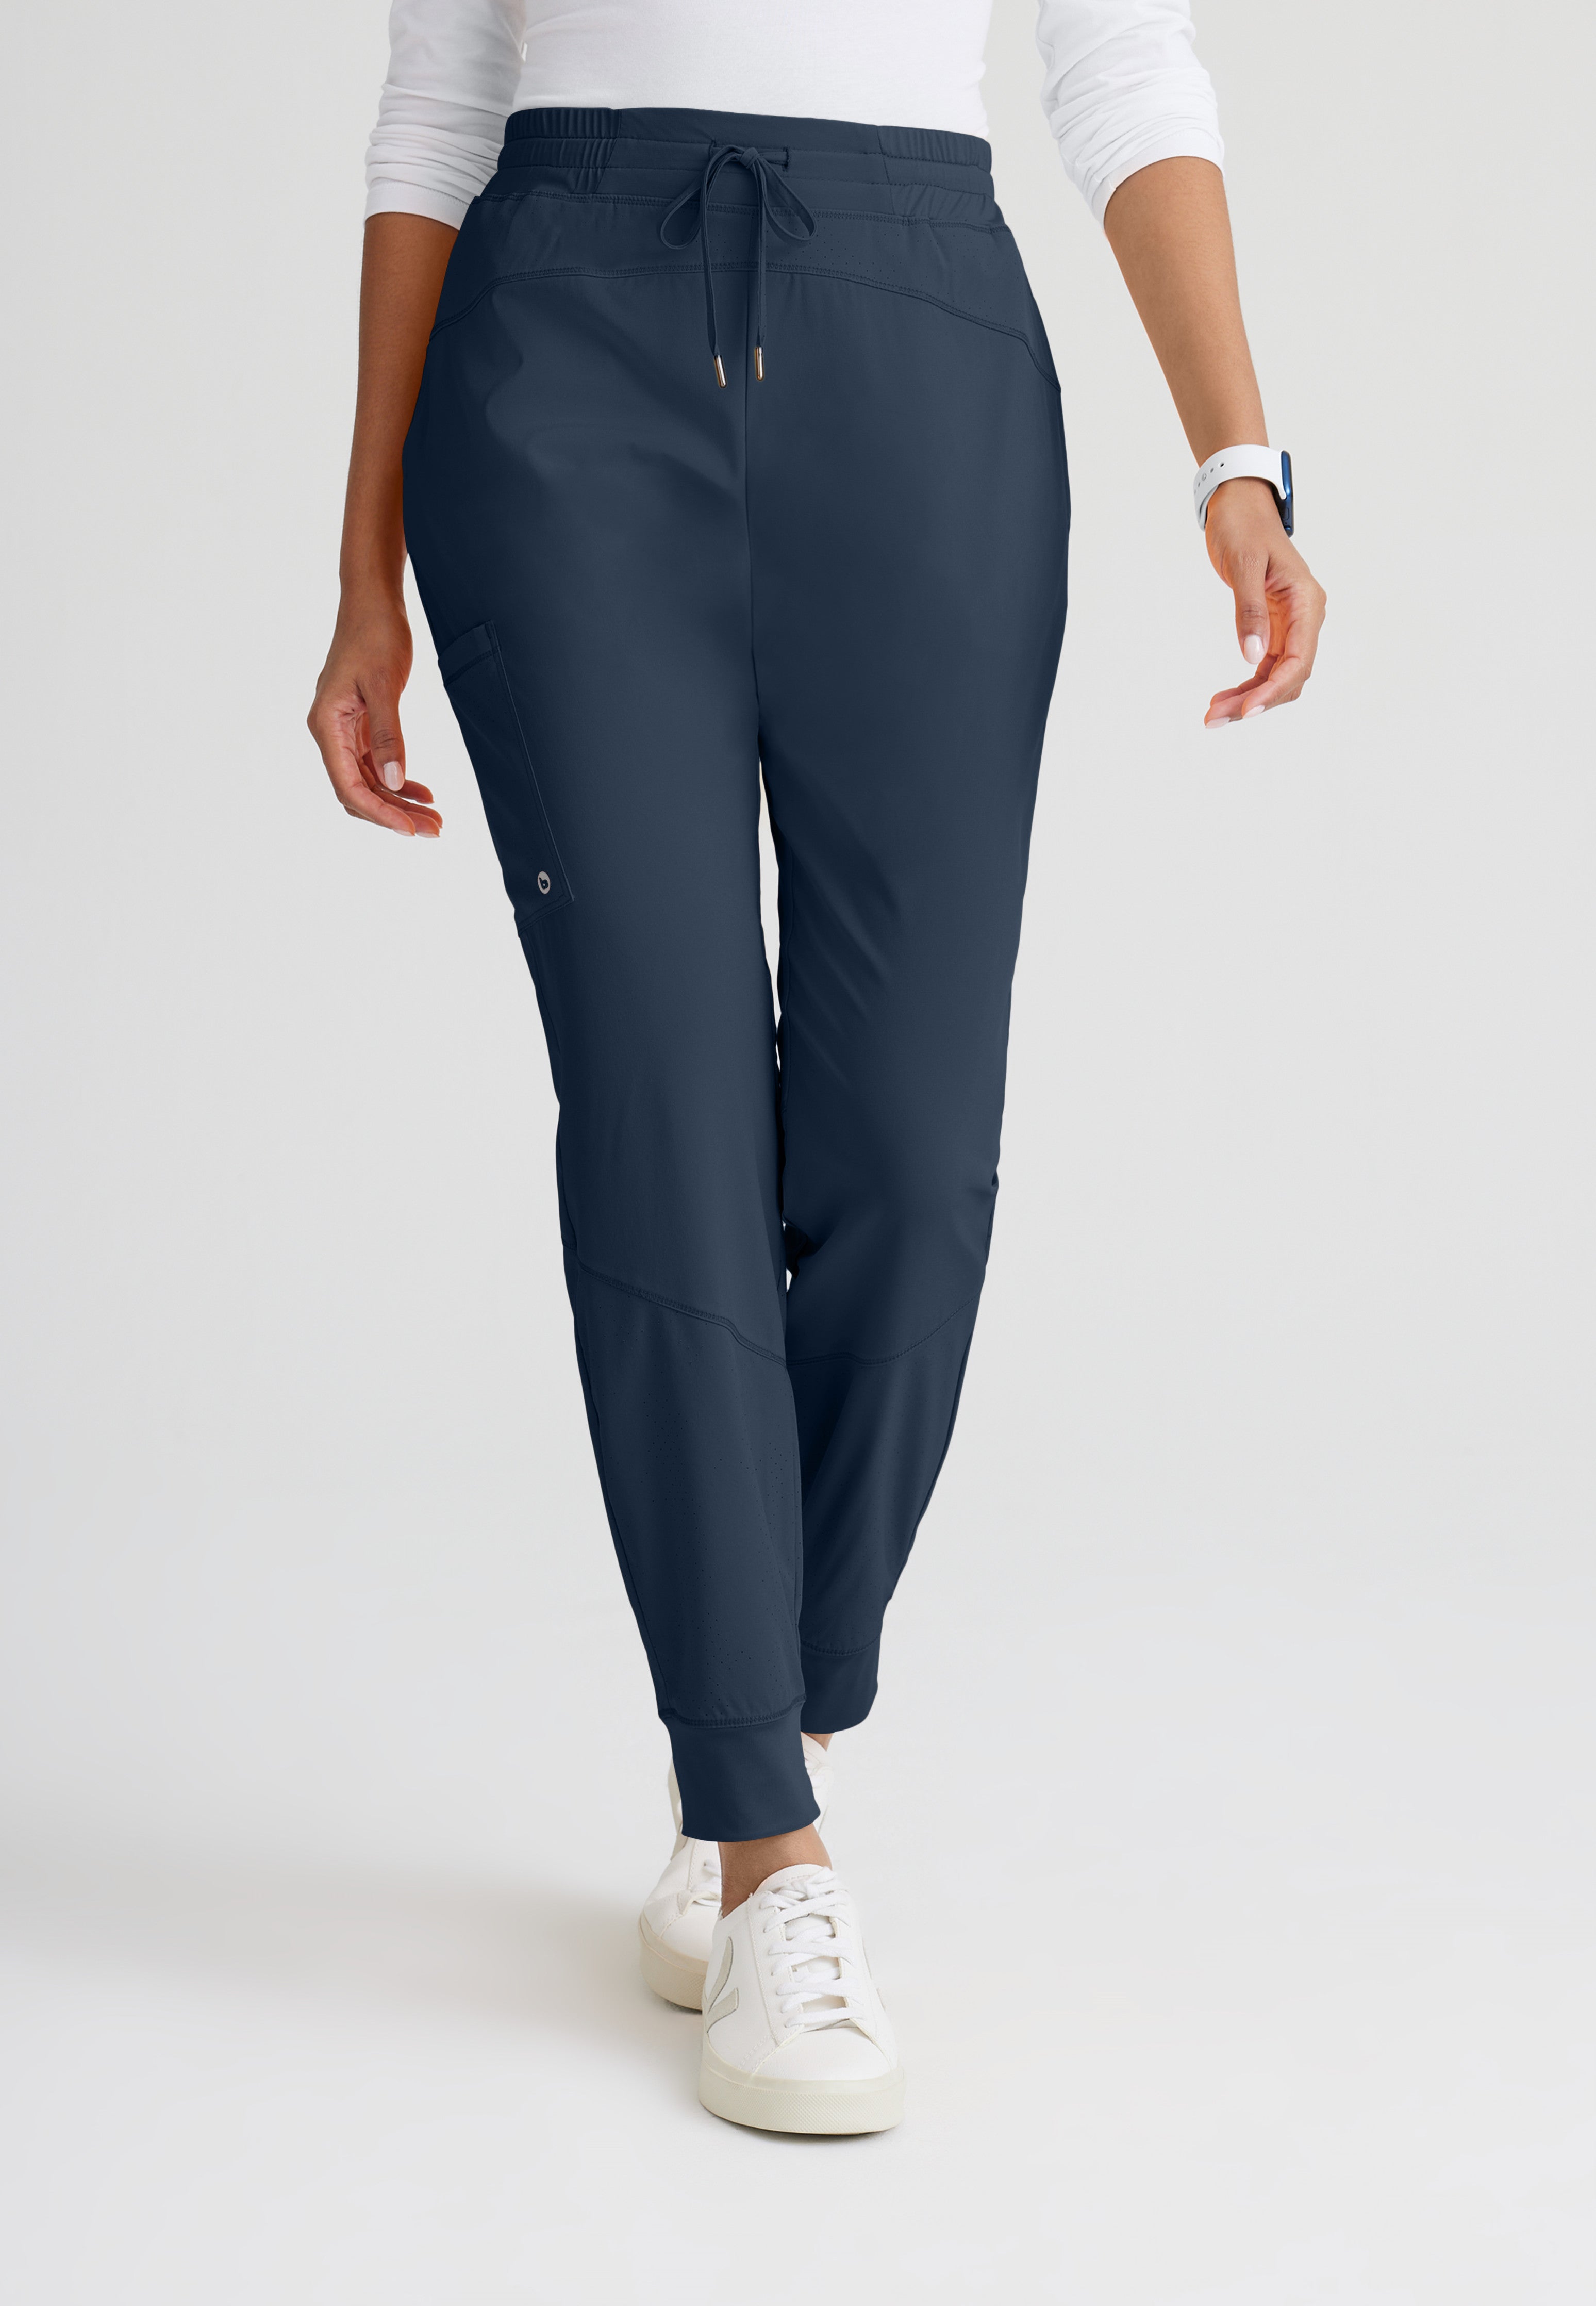 Barco One Women's Boost Jogger Pant (Petite)